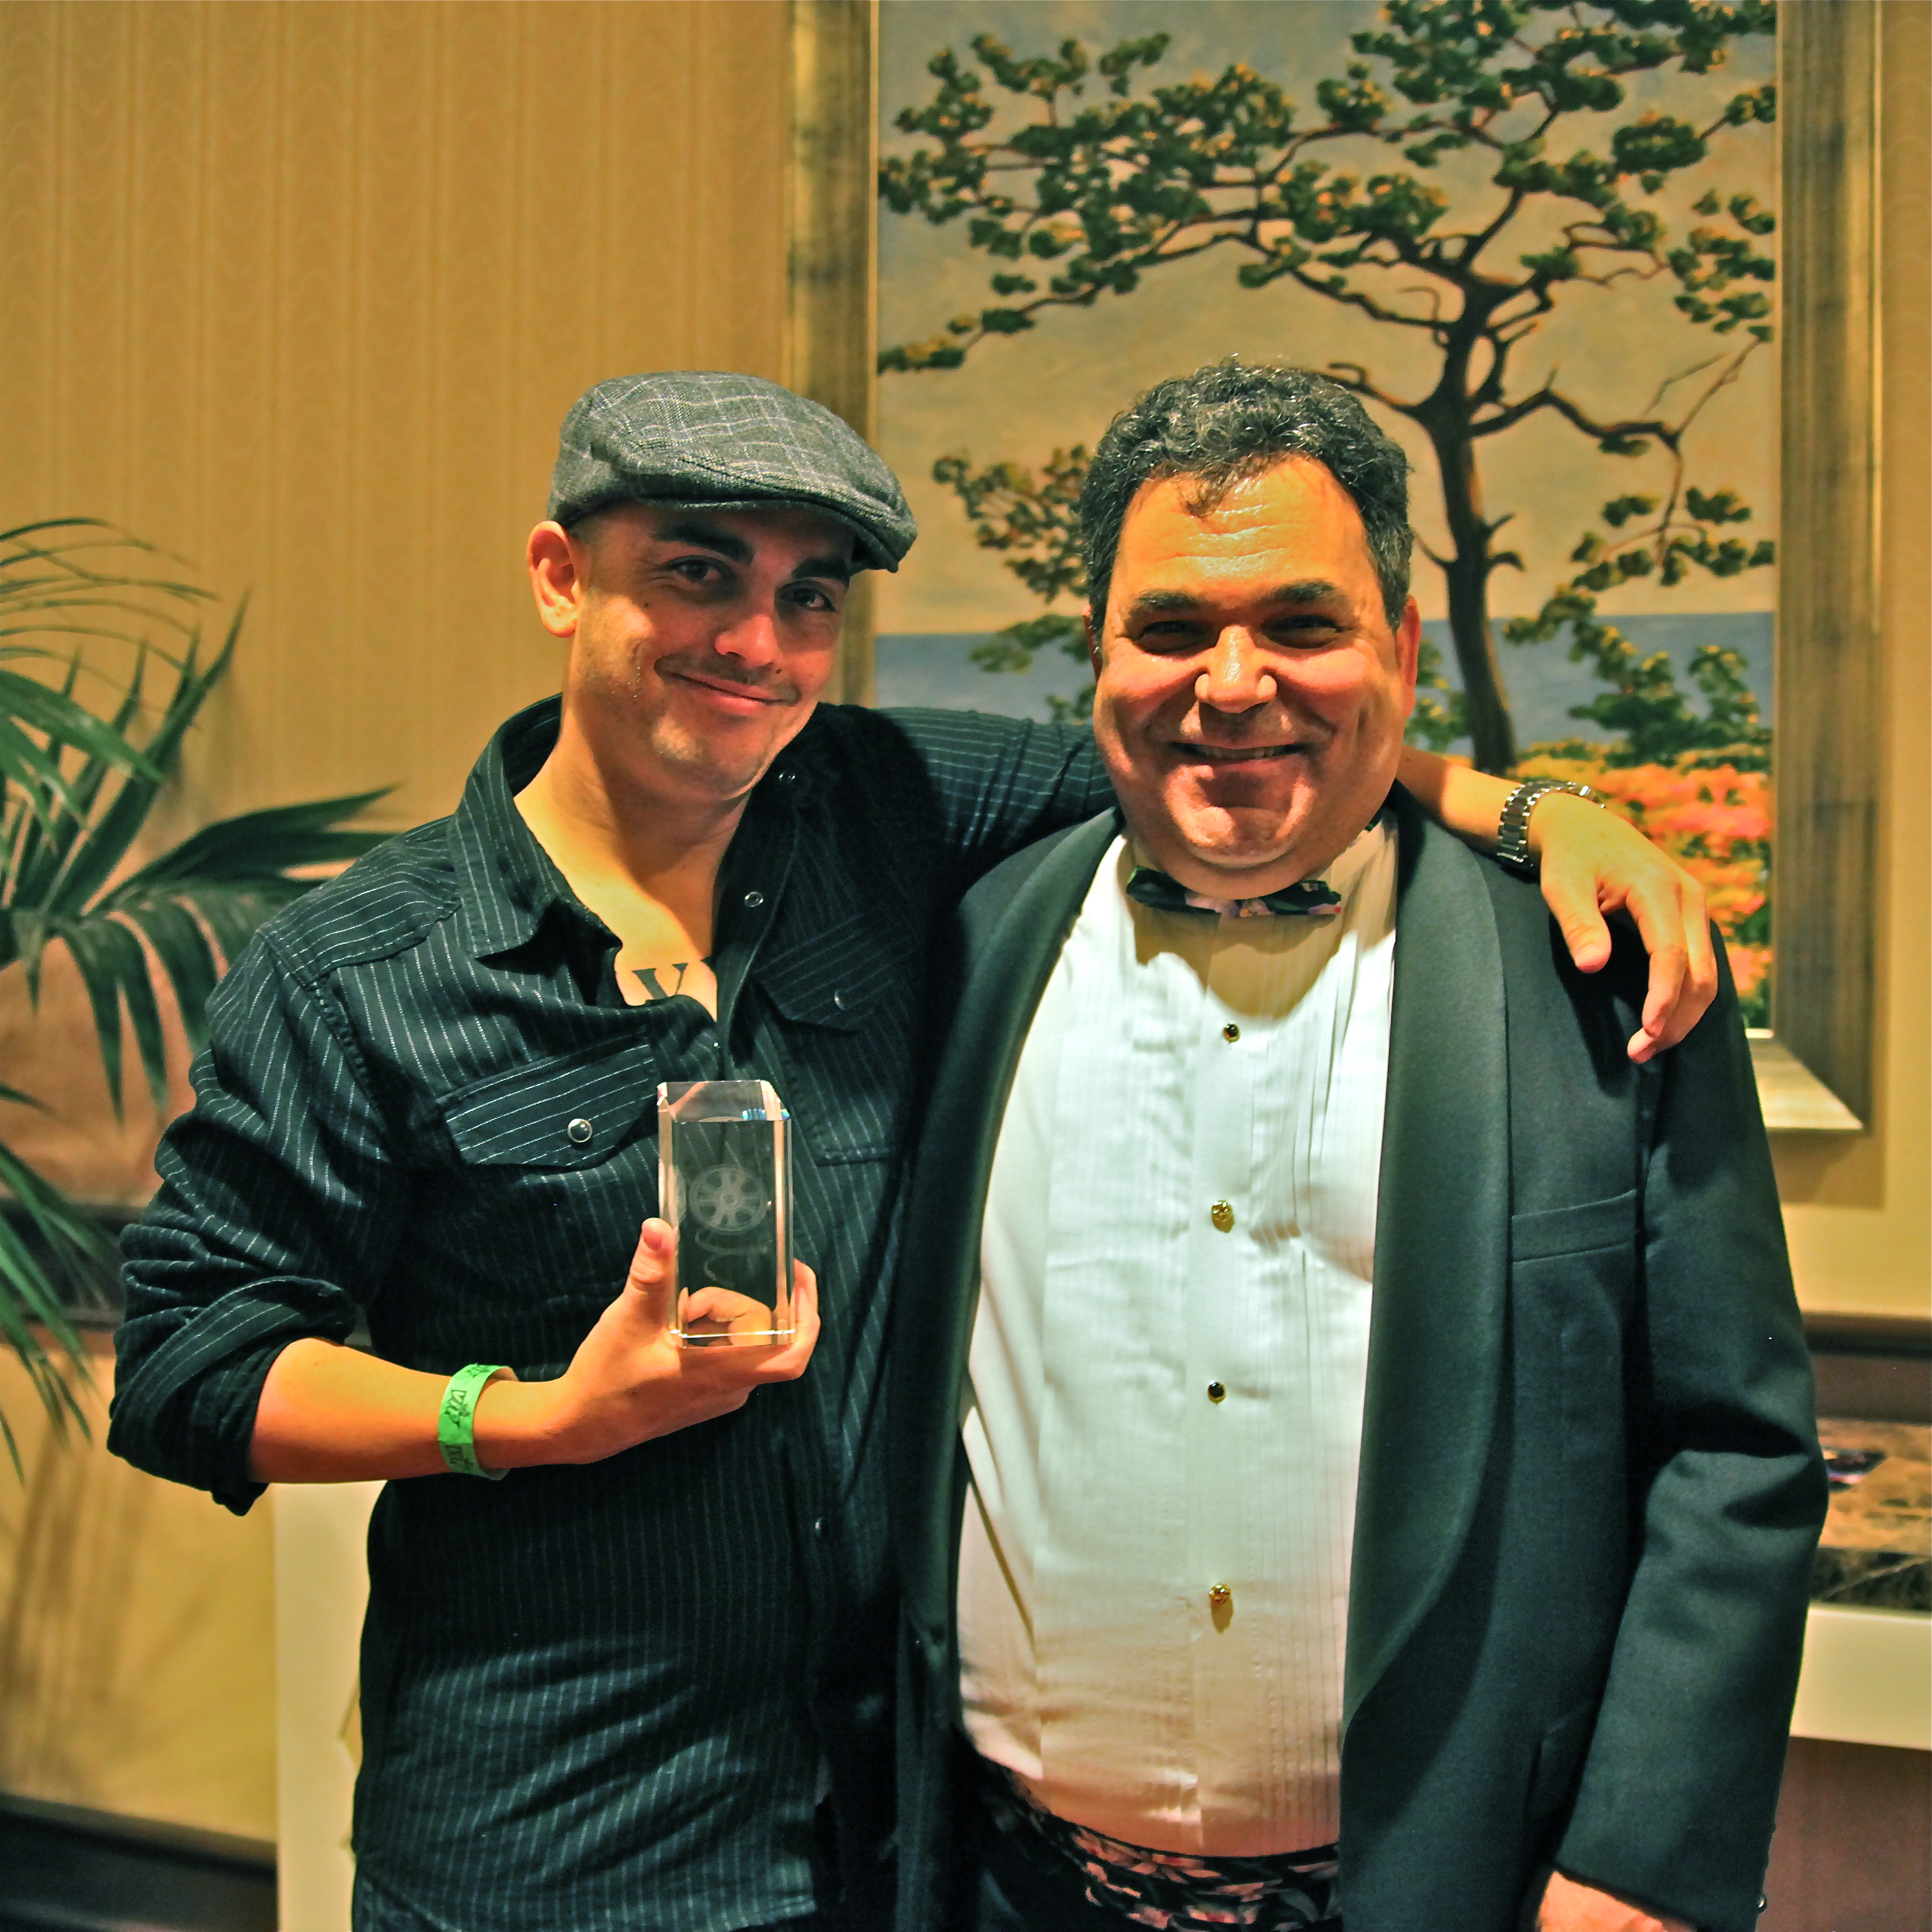 My award at the SDCFF with the Founder, Richard Bagdazian!